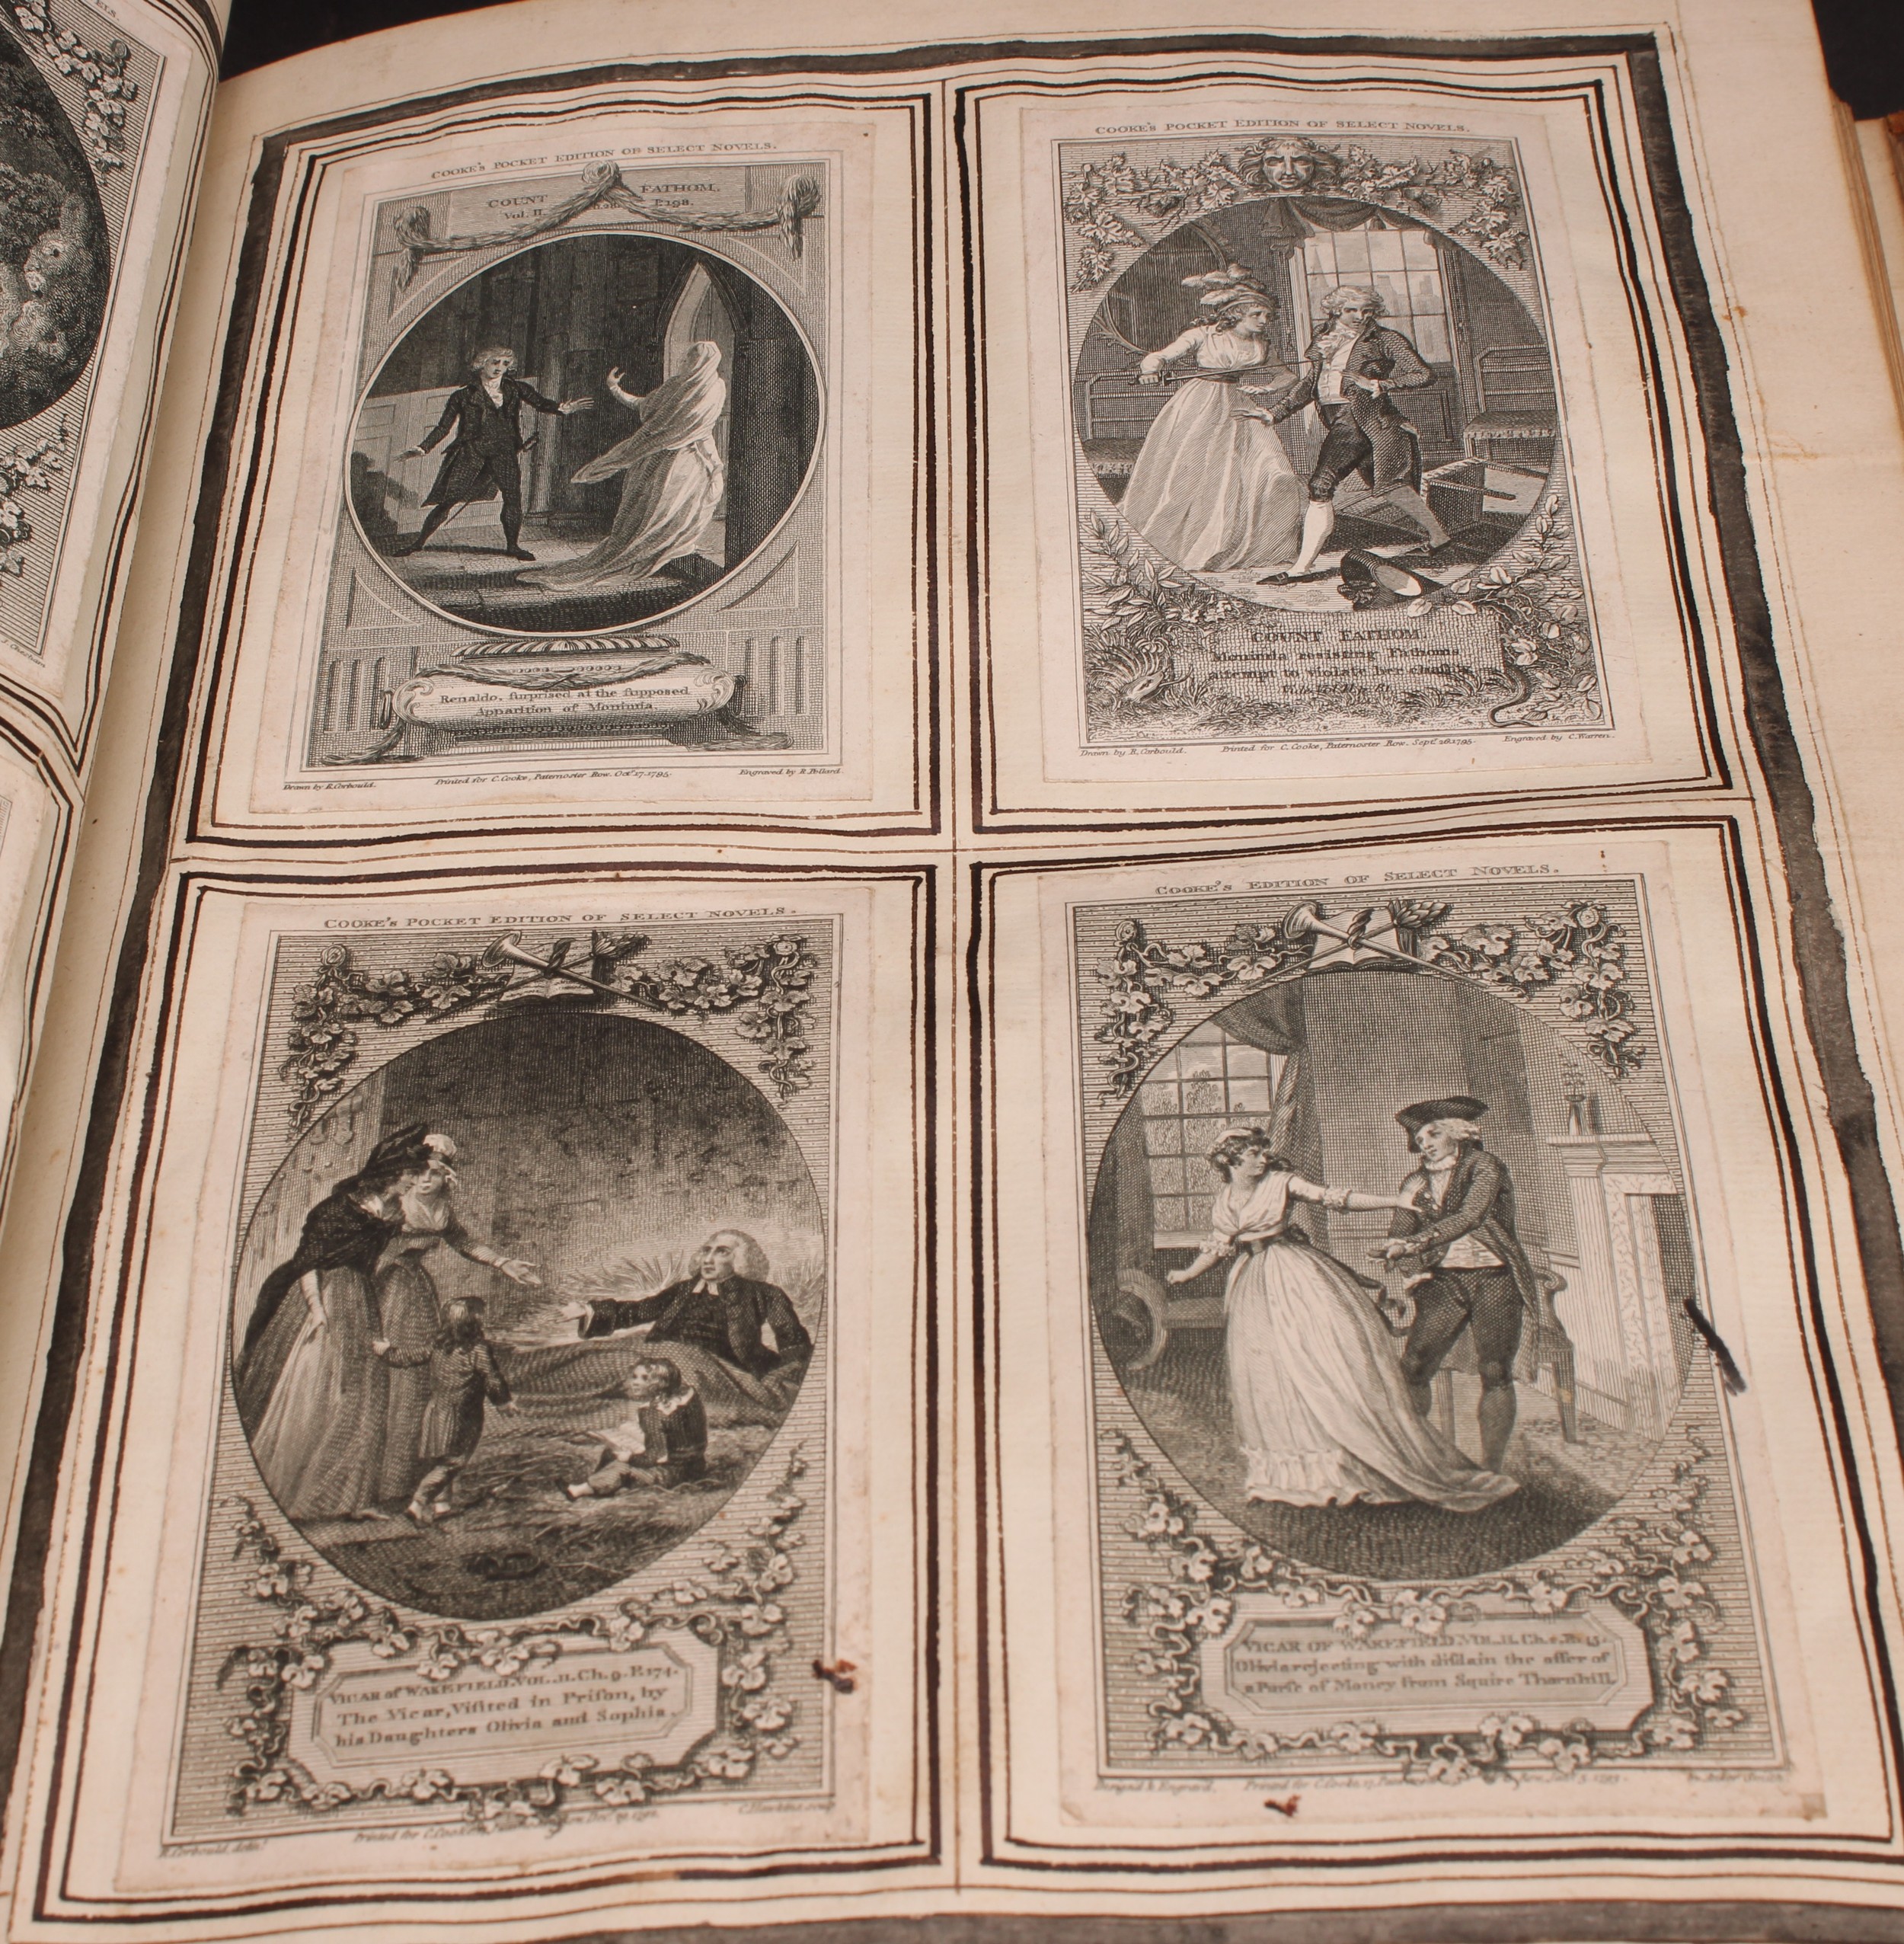 An album of 19th century engravings, hand-scrivened frontispiece inscribed 'A Collection of Prints - Image 2 of 6